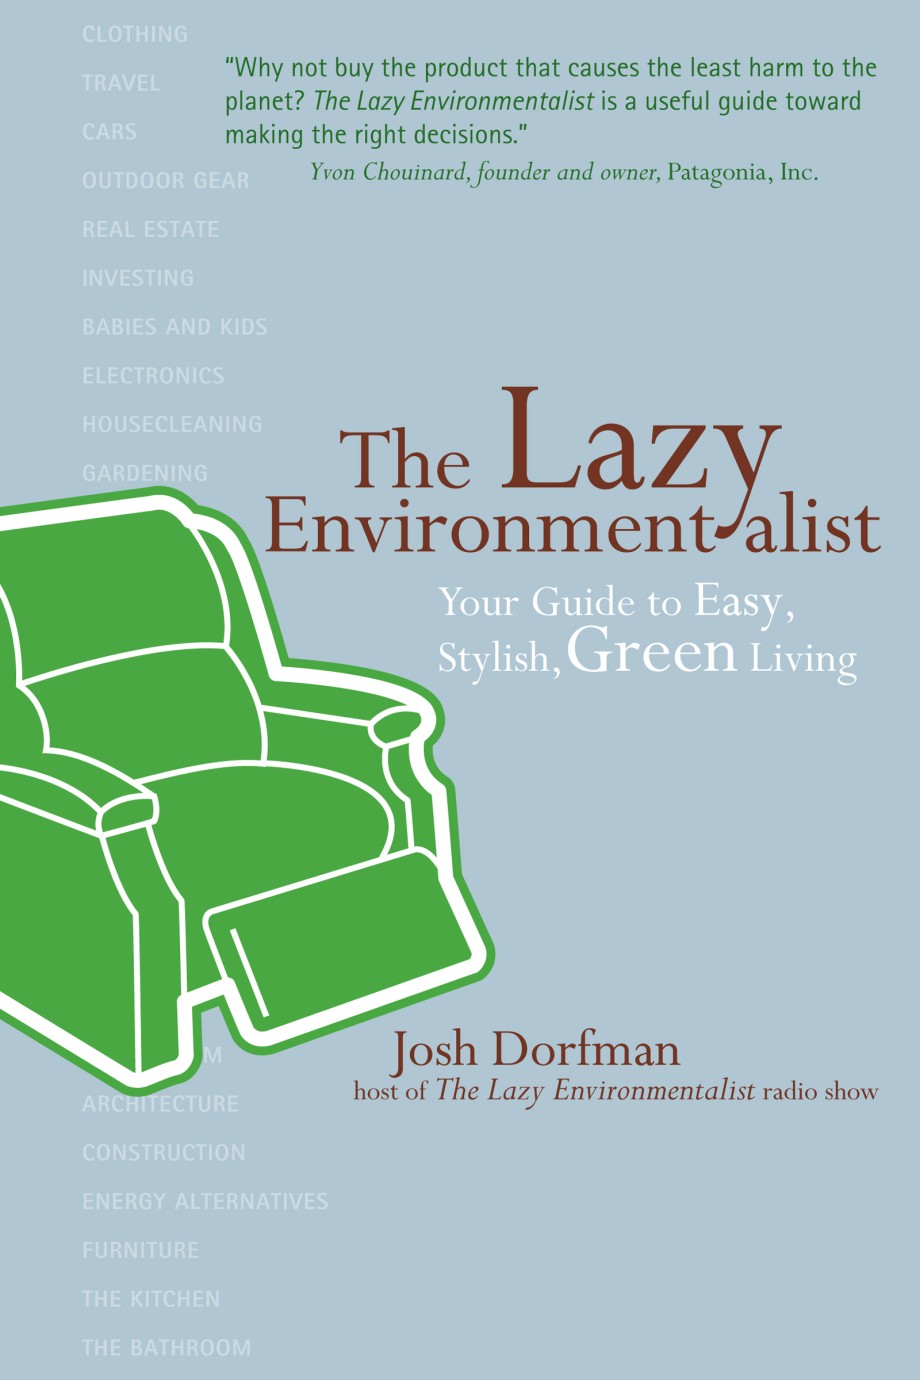 Lazy Environmentalist Your Guide to Easy, Stylish, Green Living